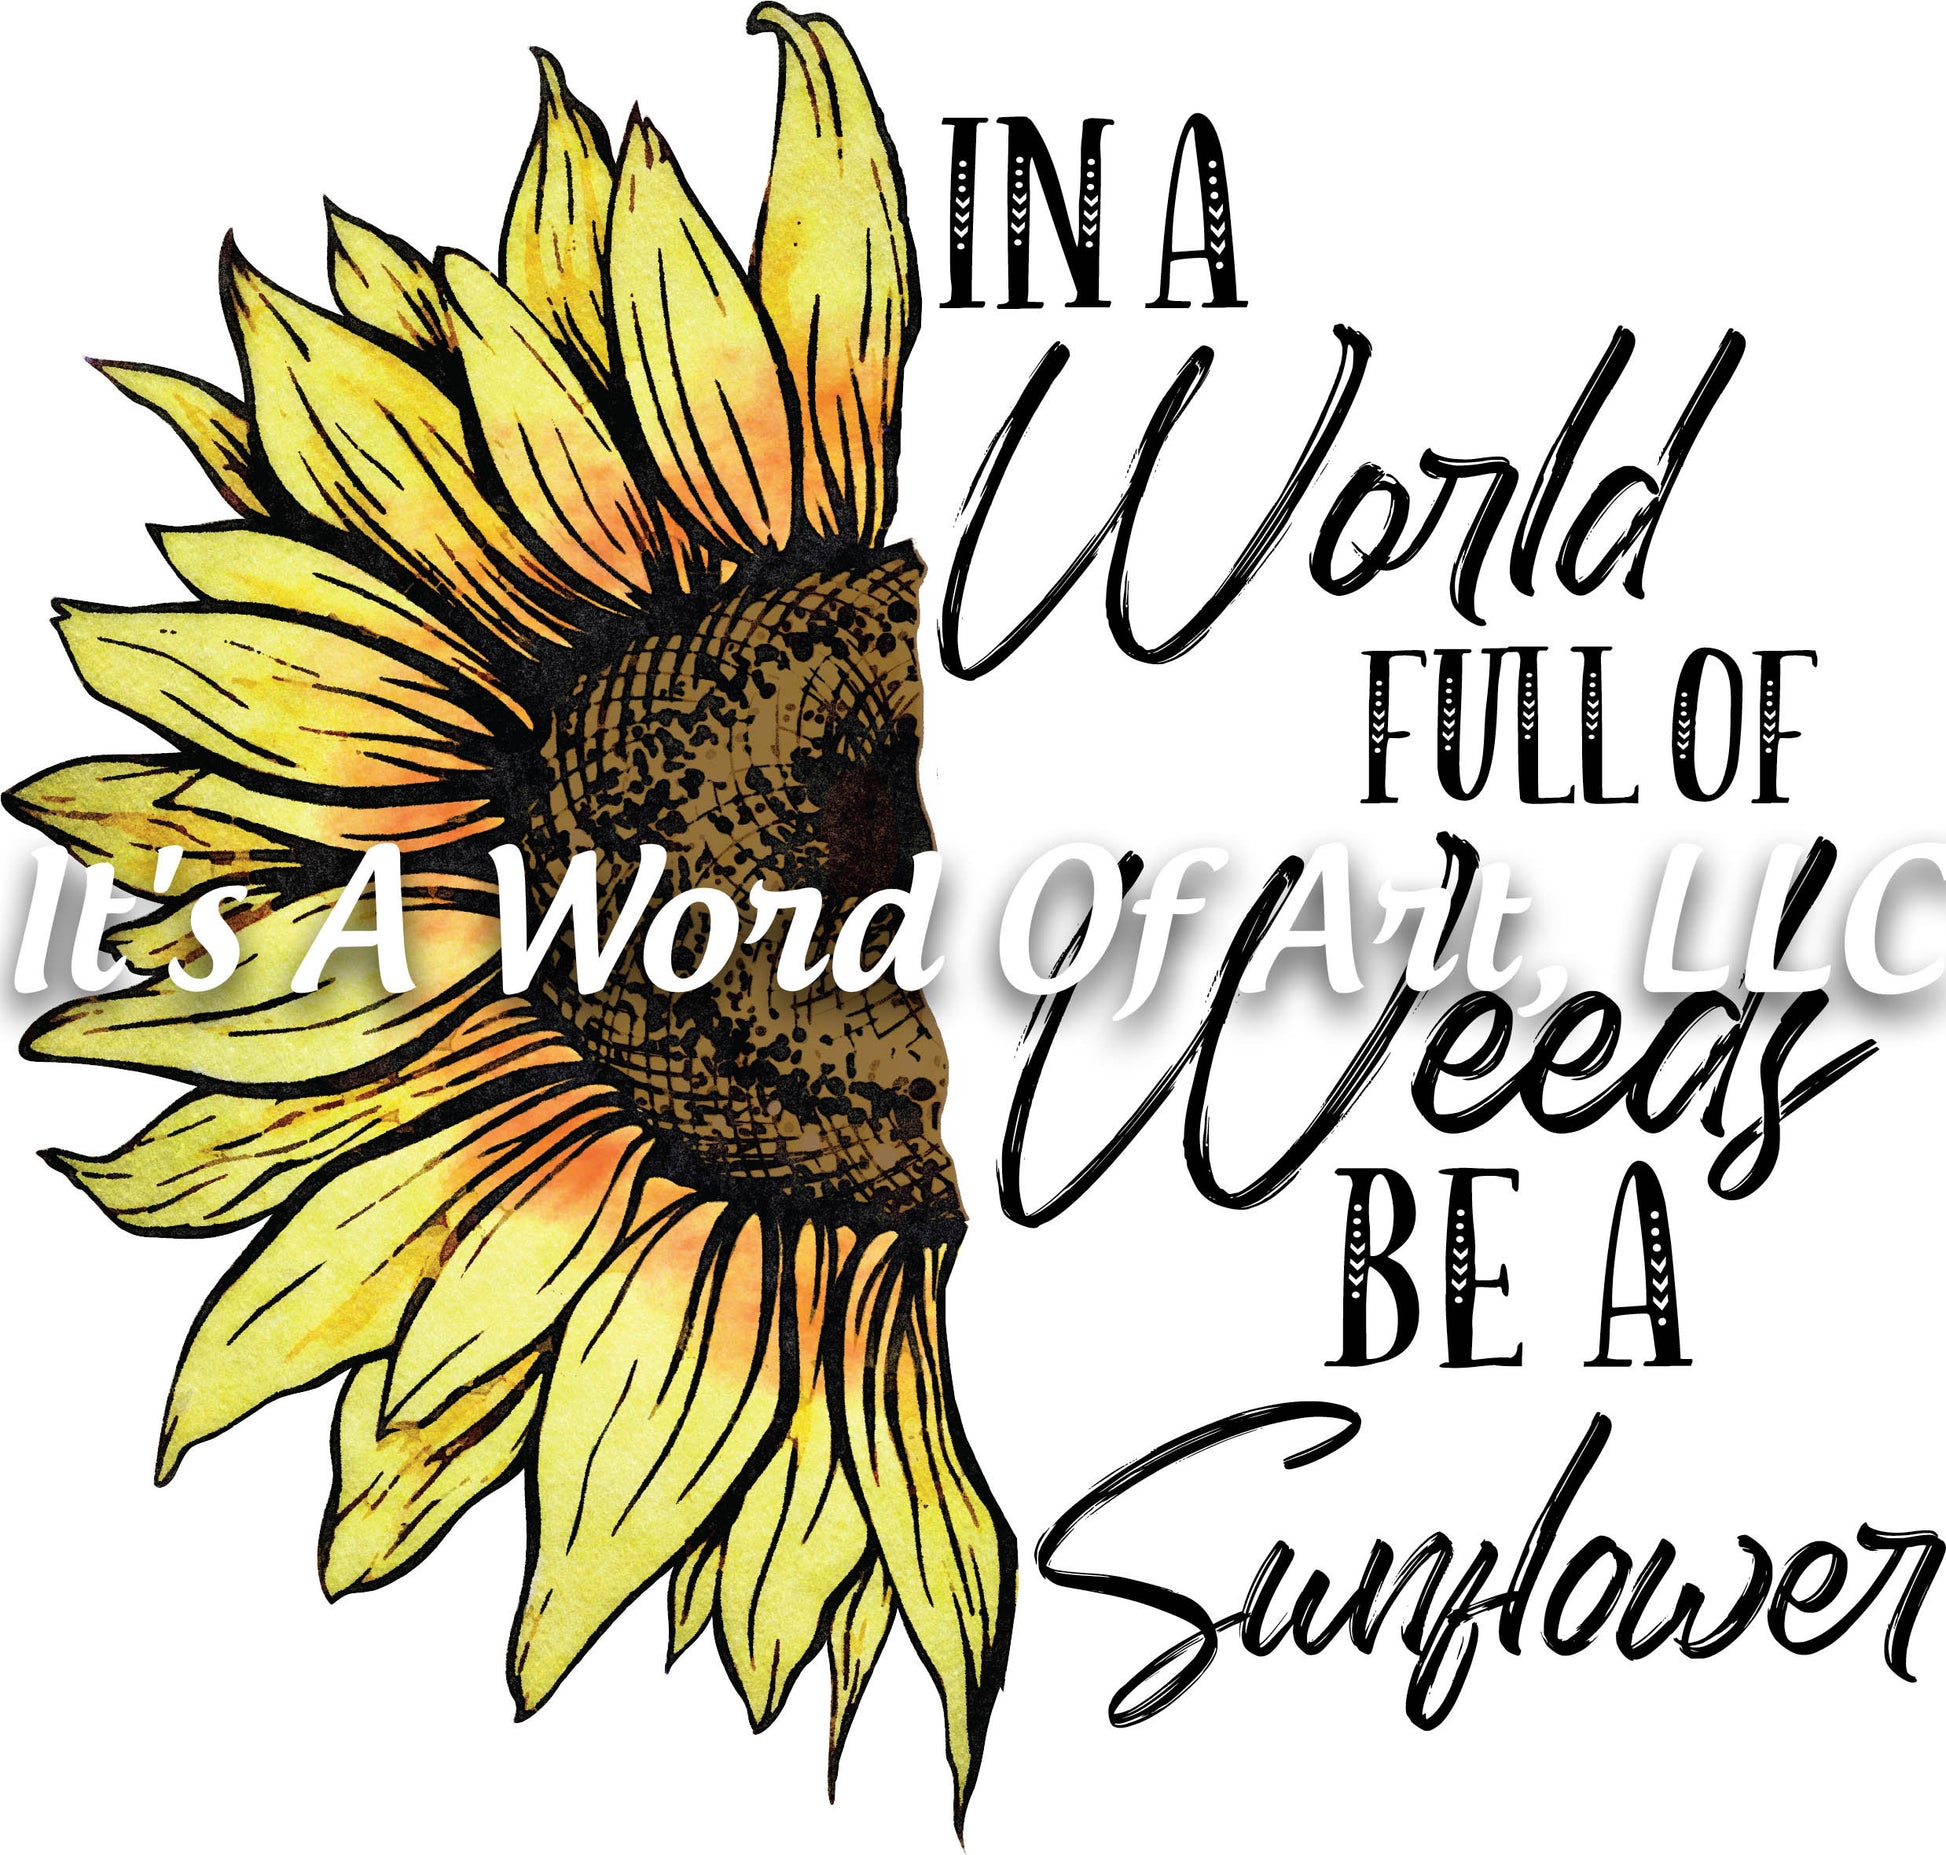 Sunflower 13 - In a World Full of Weeds, be a Sunflower - Sublimation Transfer Set/Ready To Press Sublimation Transfer/Sublimation Transfer